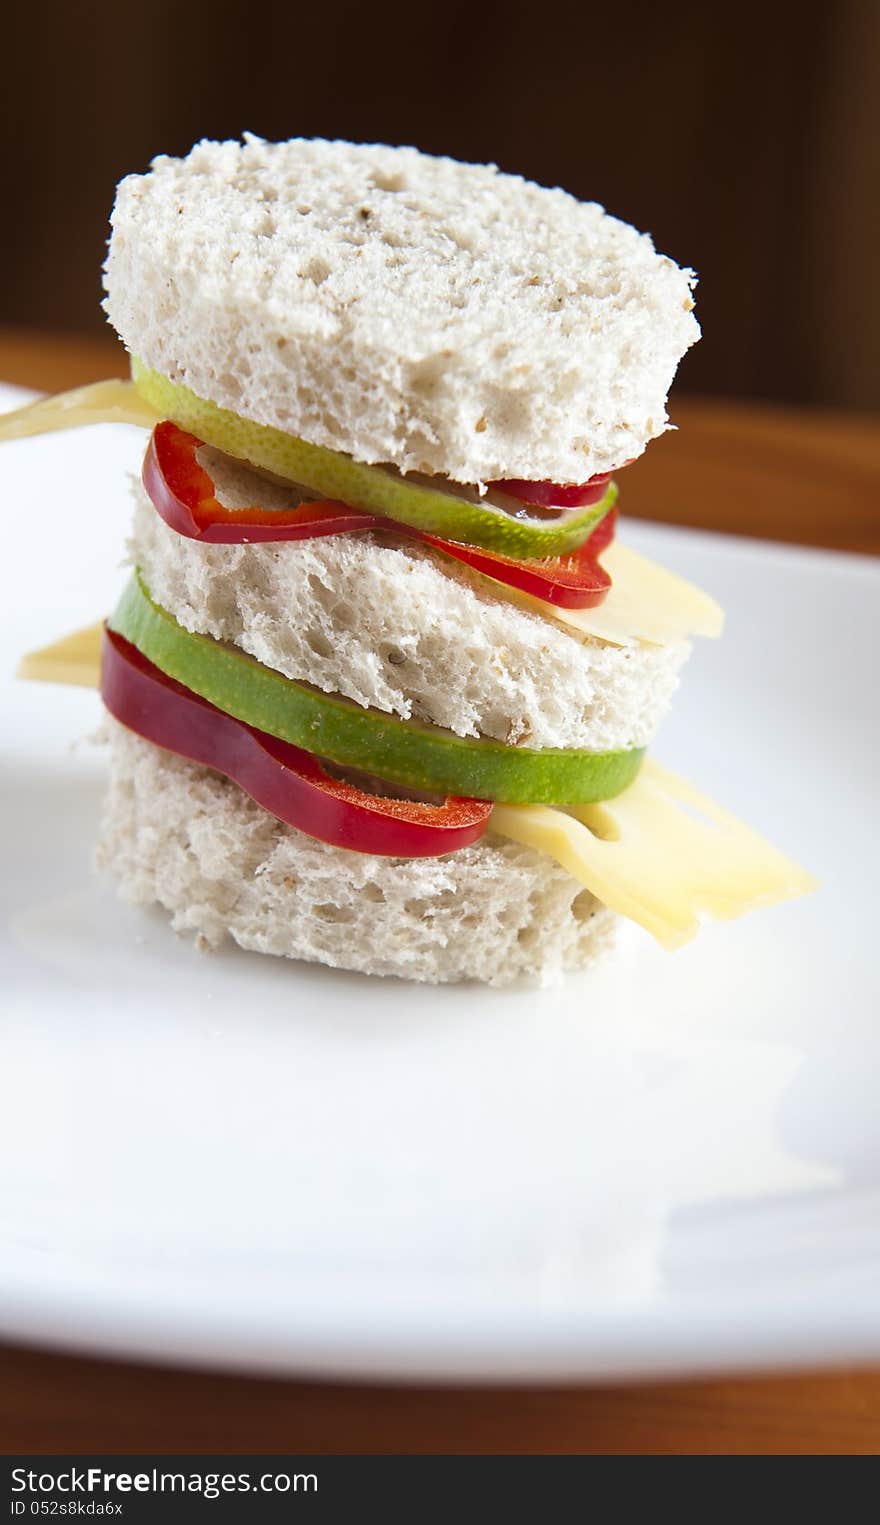 Small sandwich served as appetizer at parties